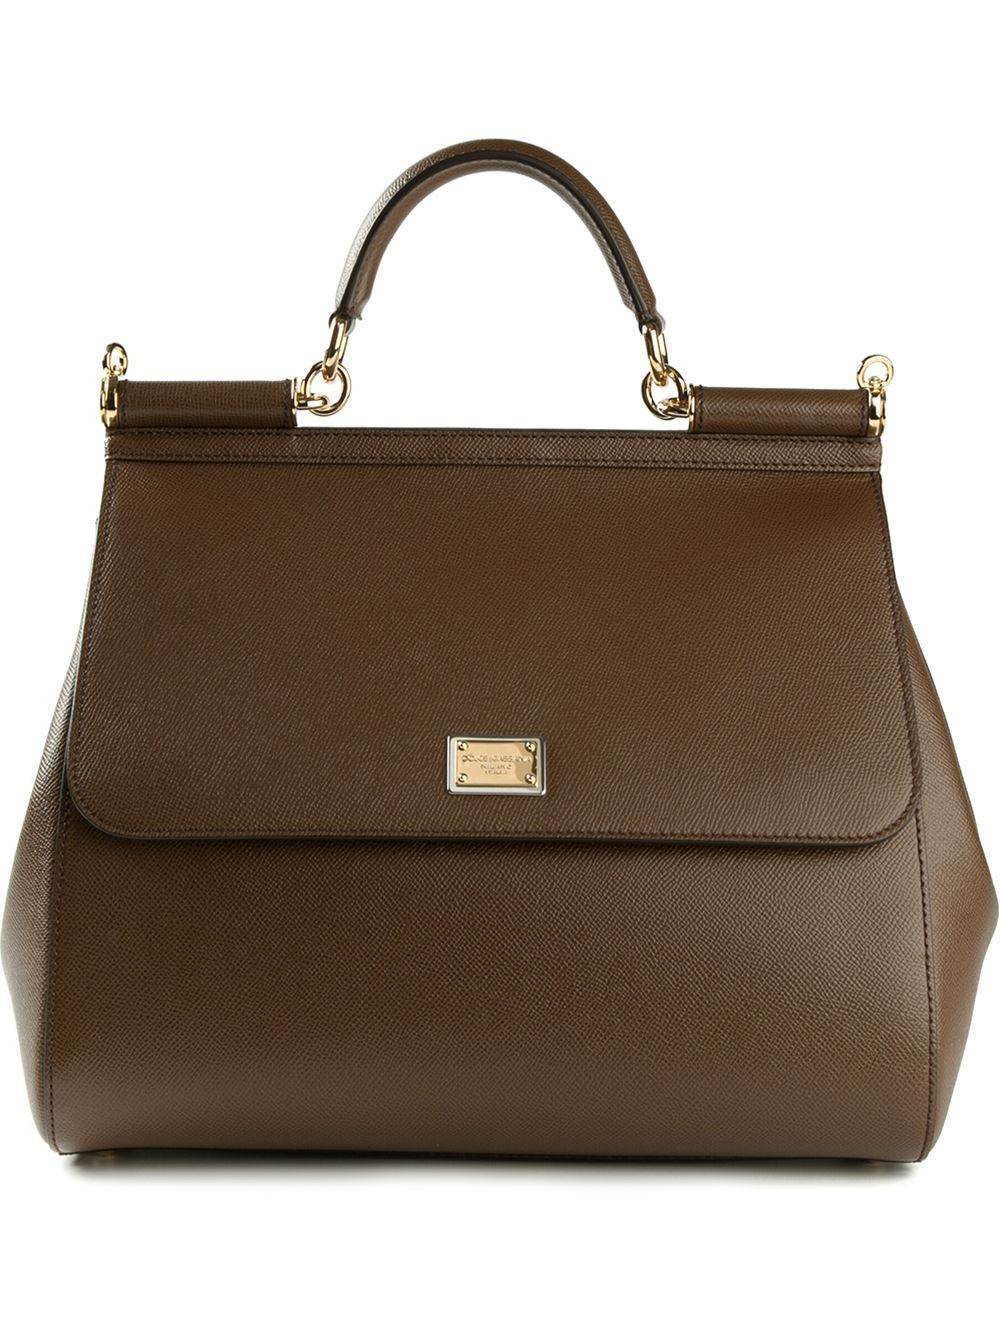 Dolce & Gabbana Large 'Dauphine Sicily' Tote in Brown